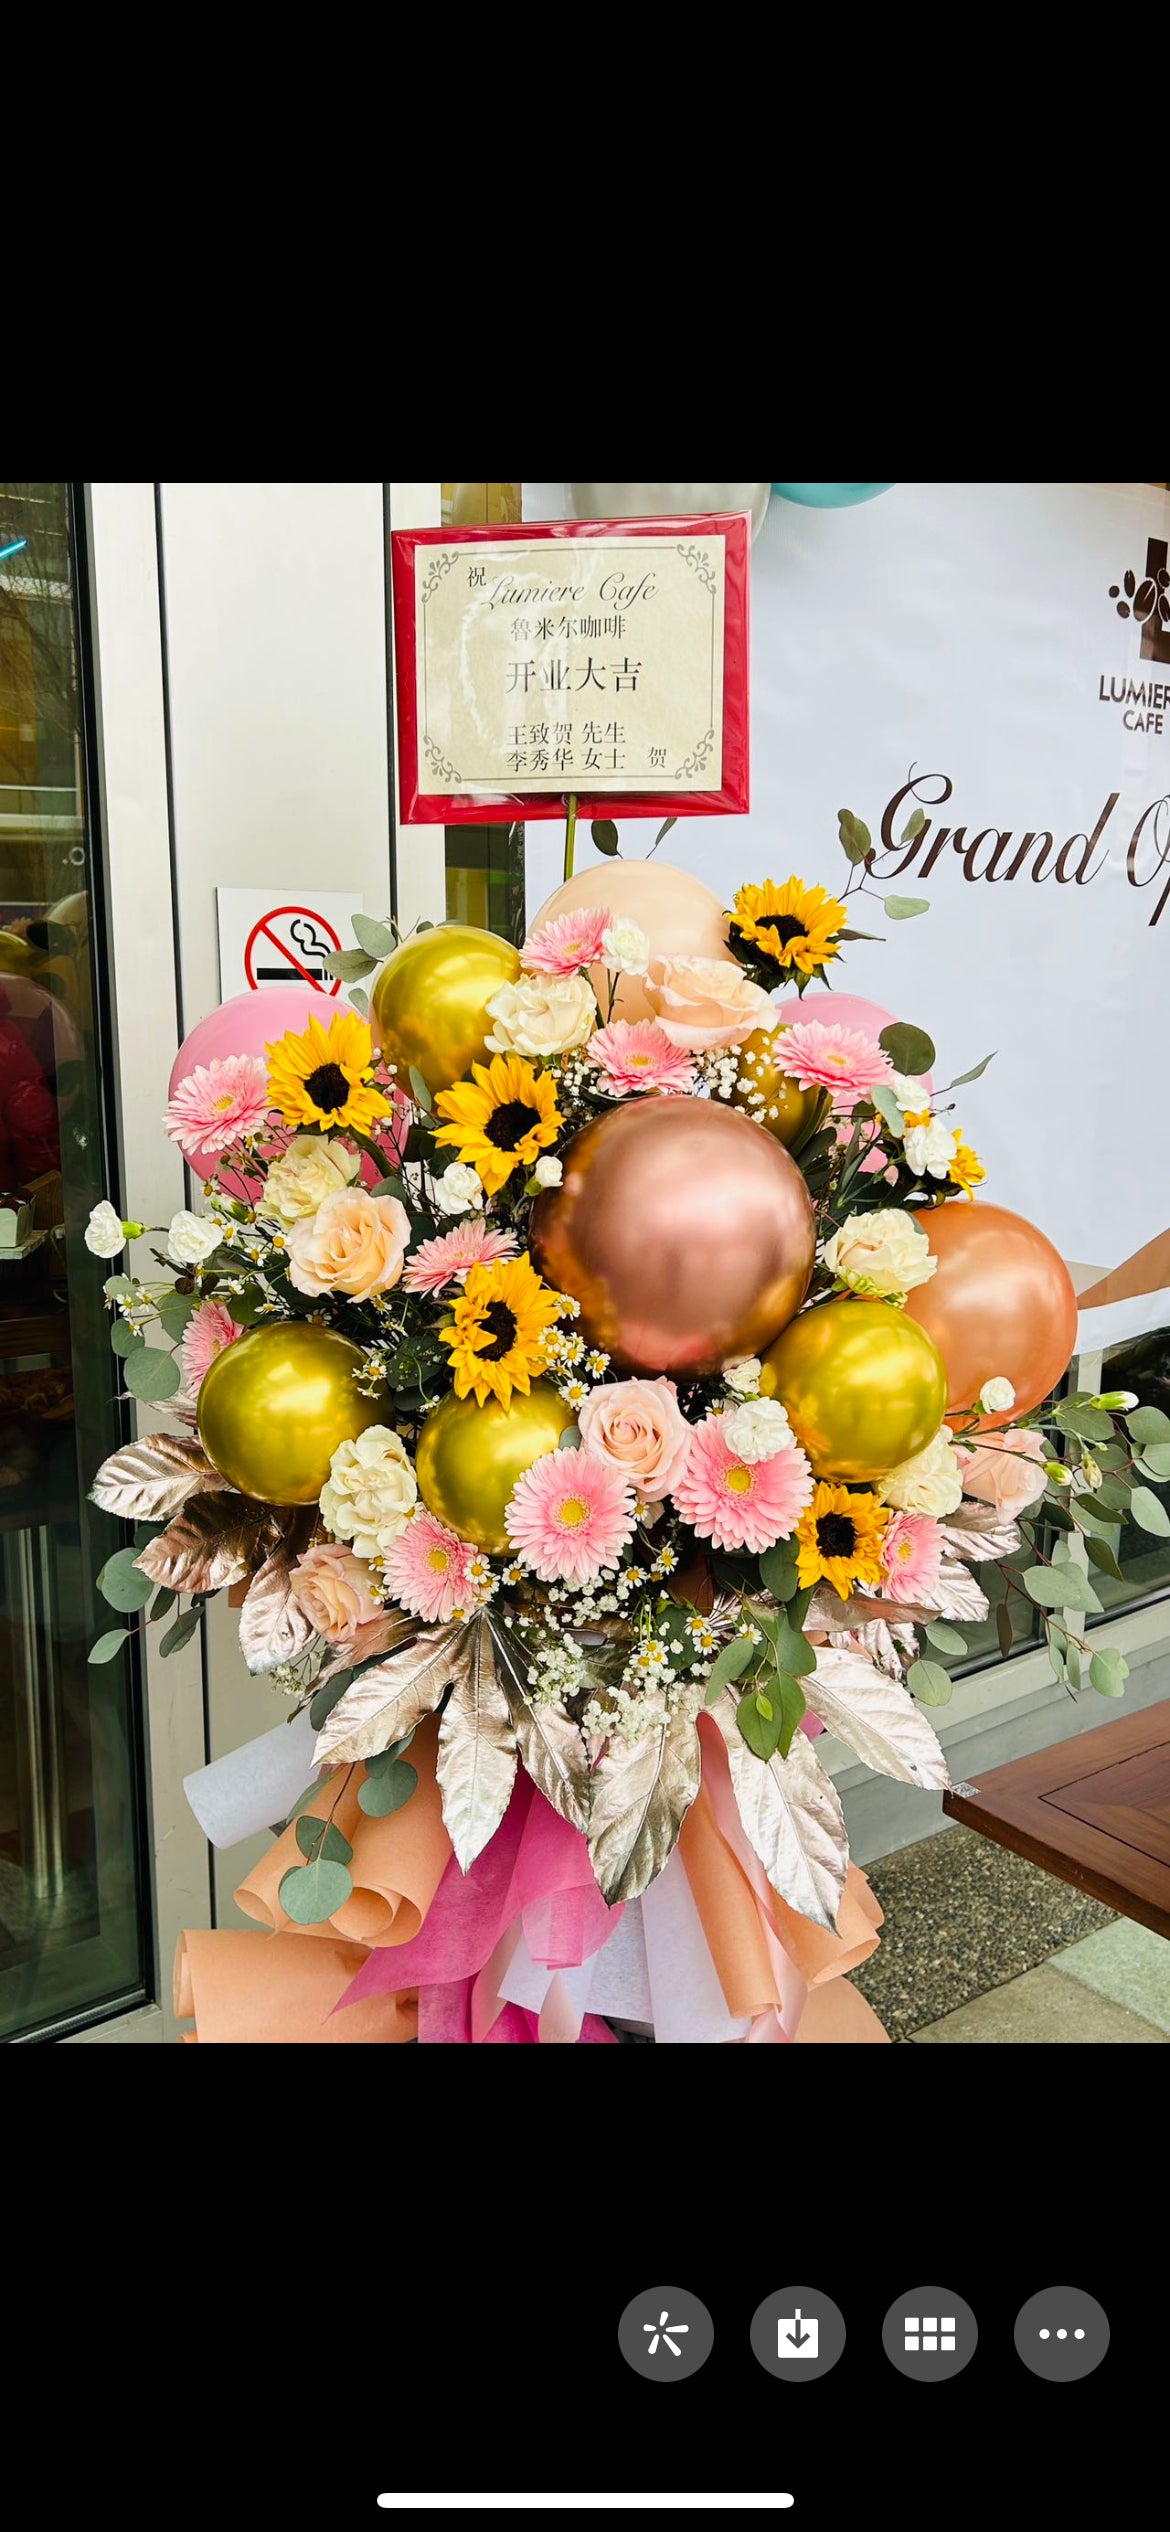 Grand Opening Flower Arrangement - with 5” balloons